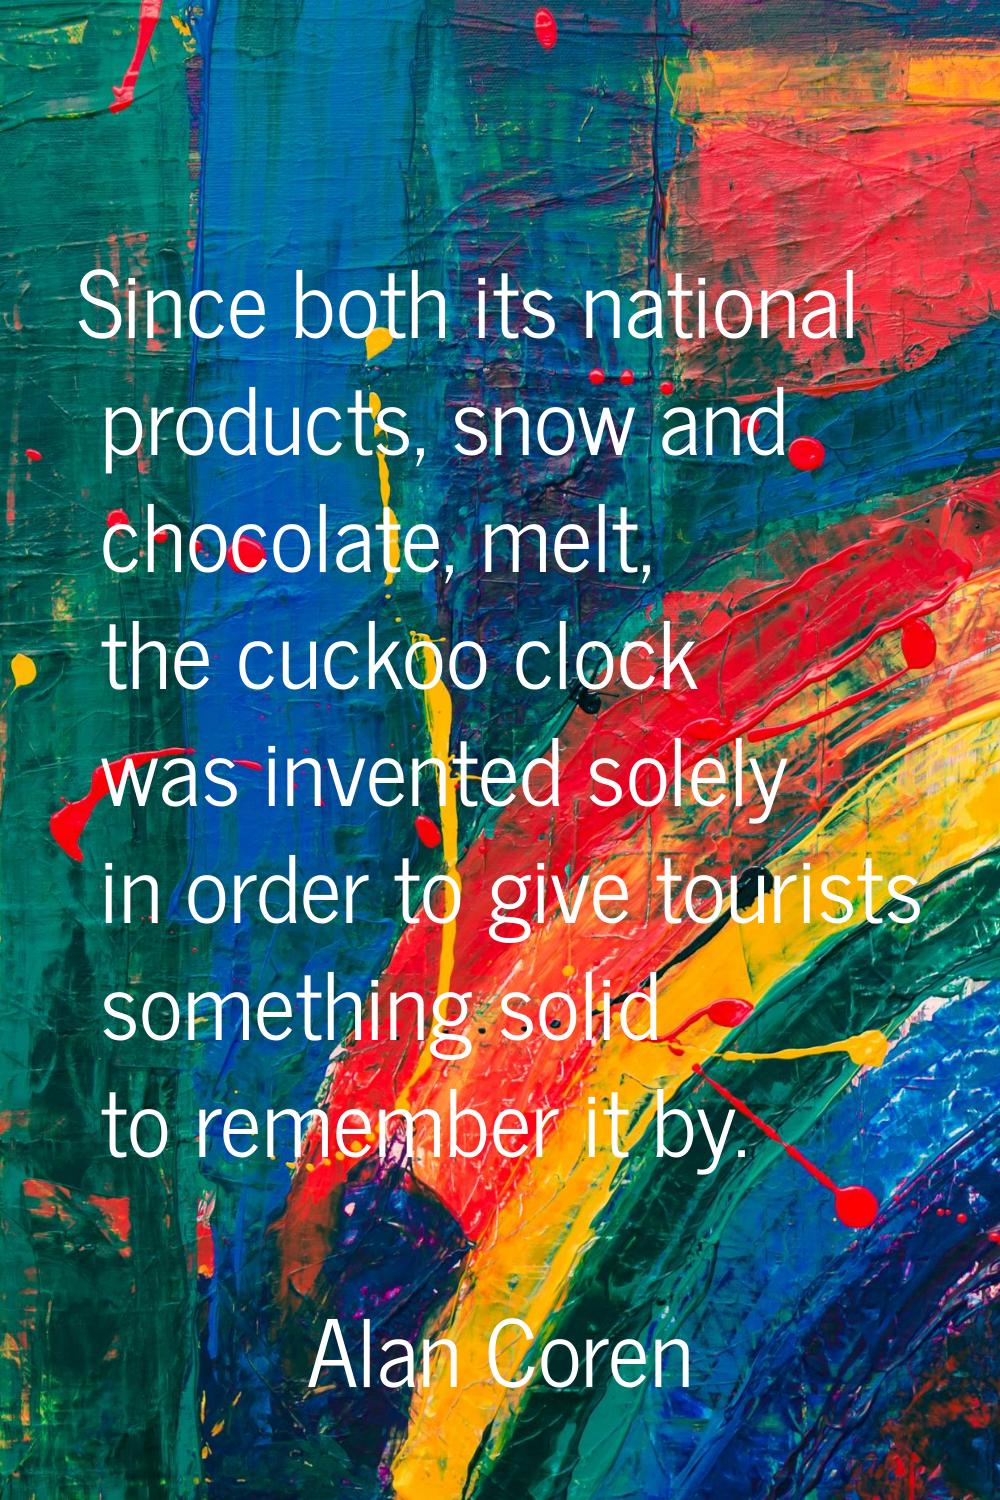 Since both its national products, snow and chocolate, melt, the cuckoo clock was invented solely in